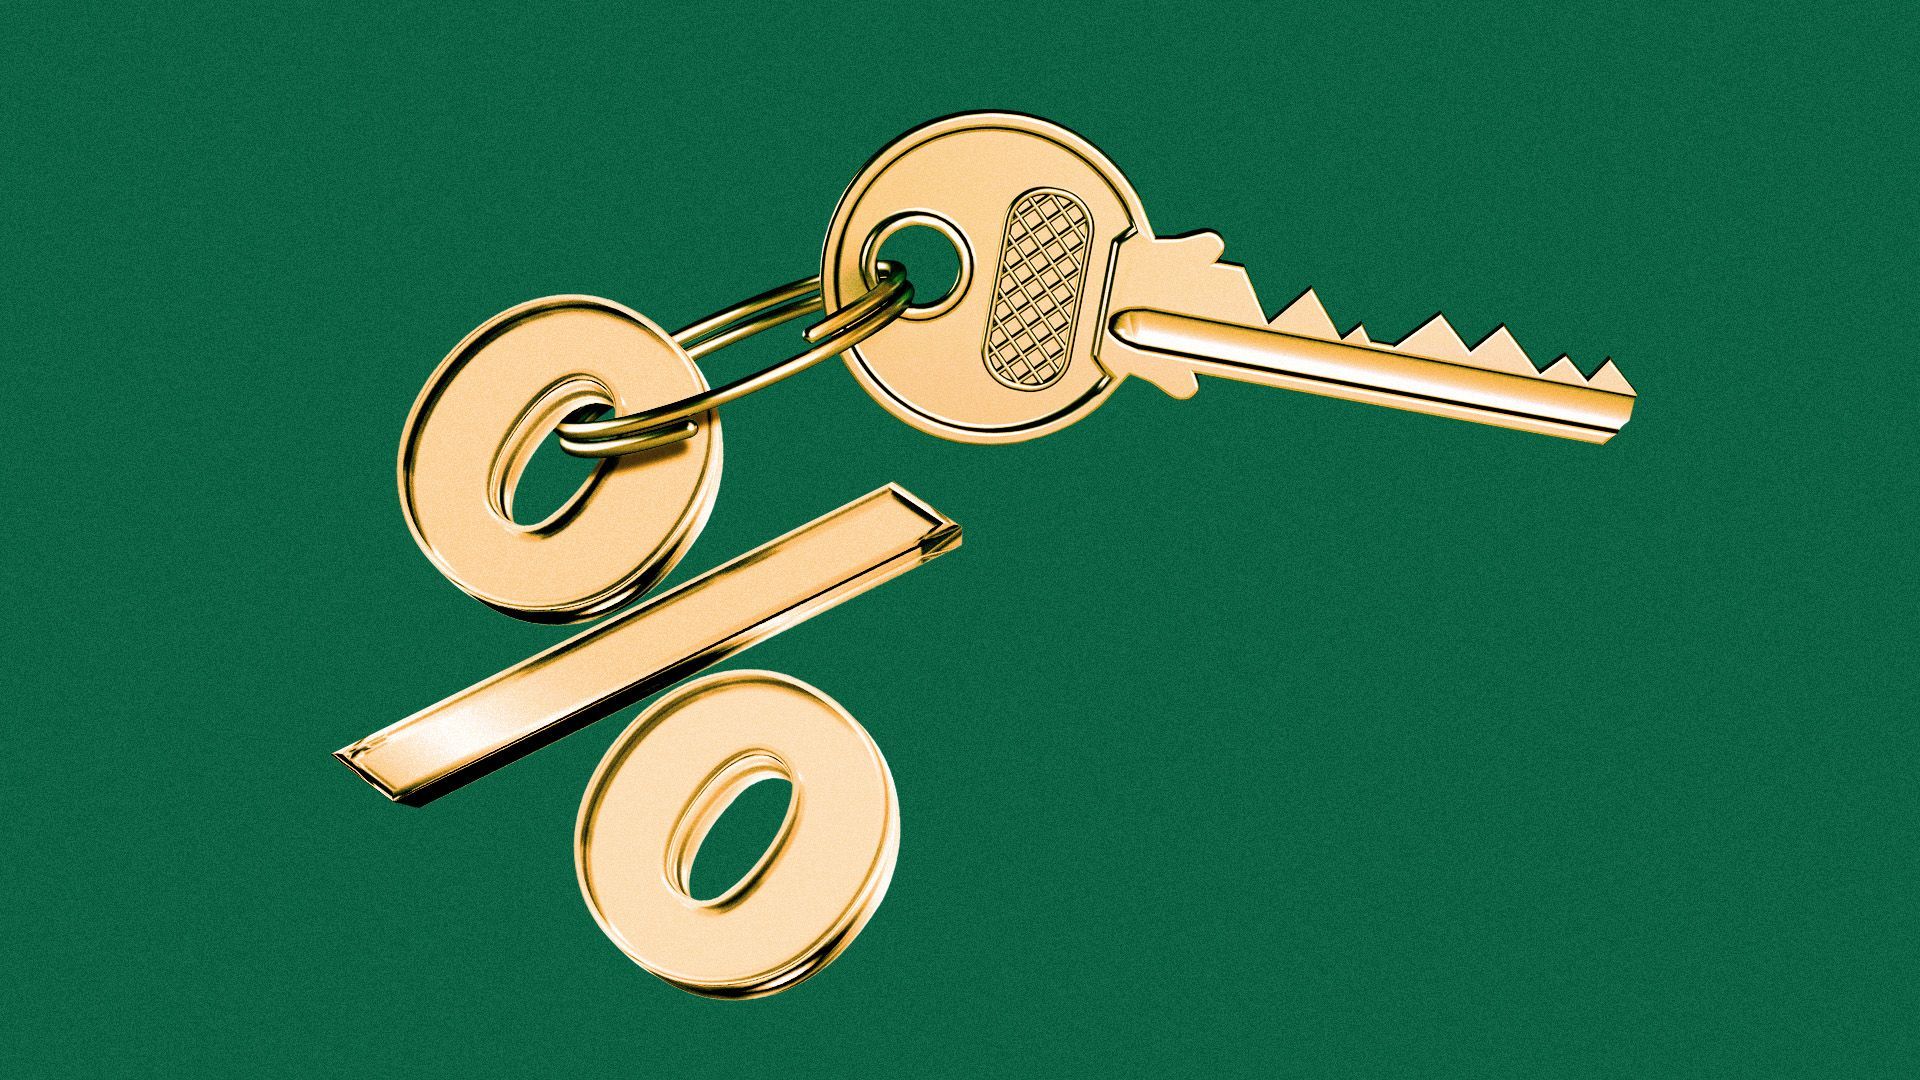 Illustration of a set of keys with a percent sign keychain